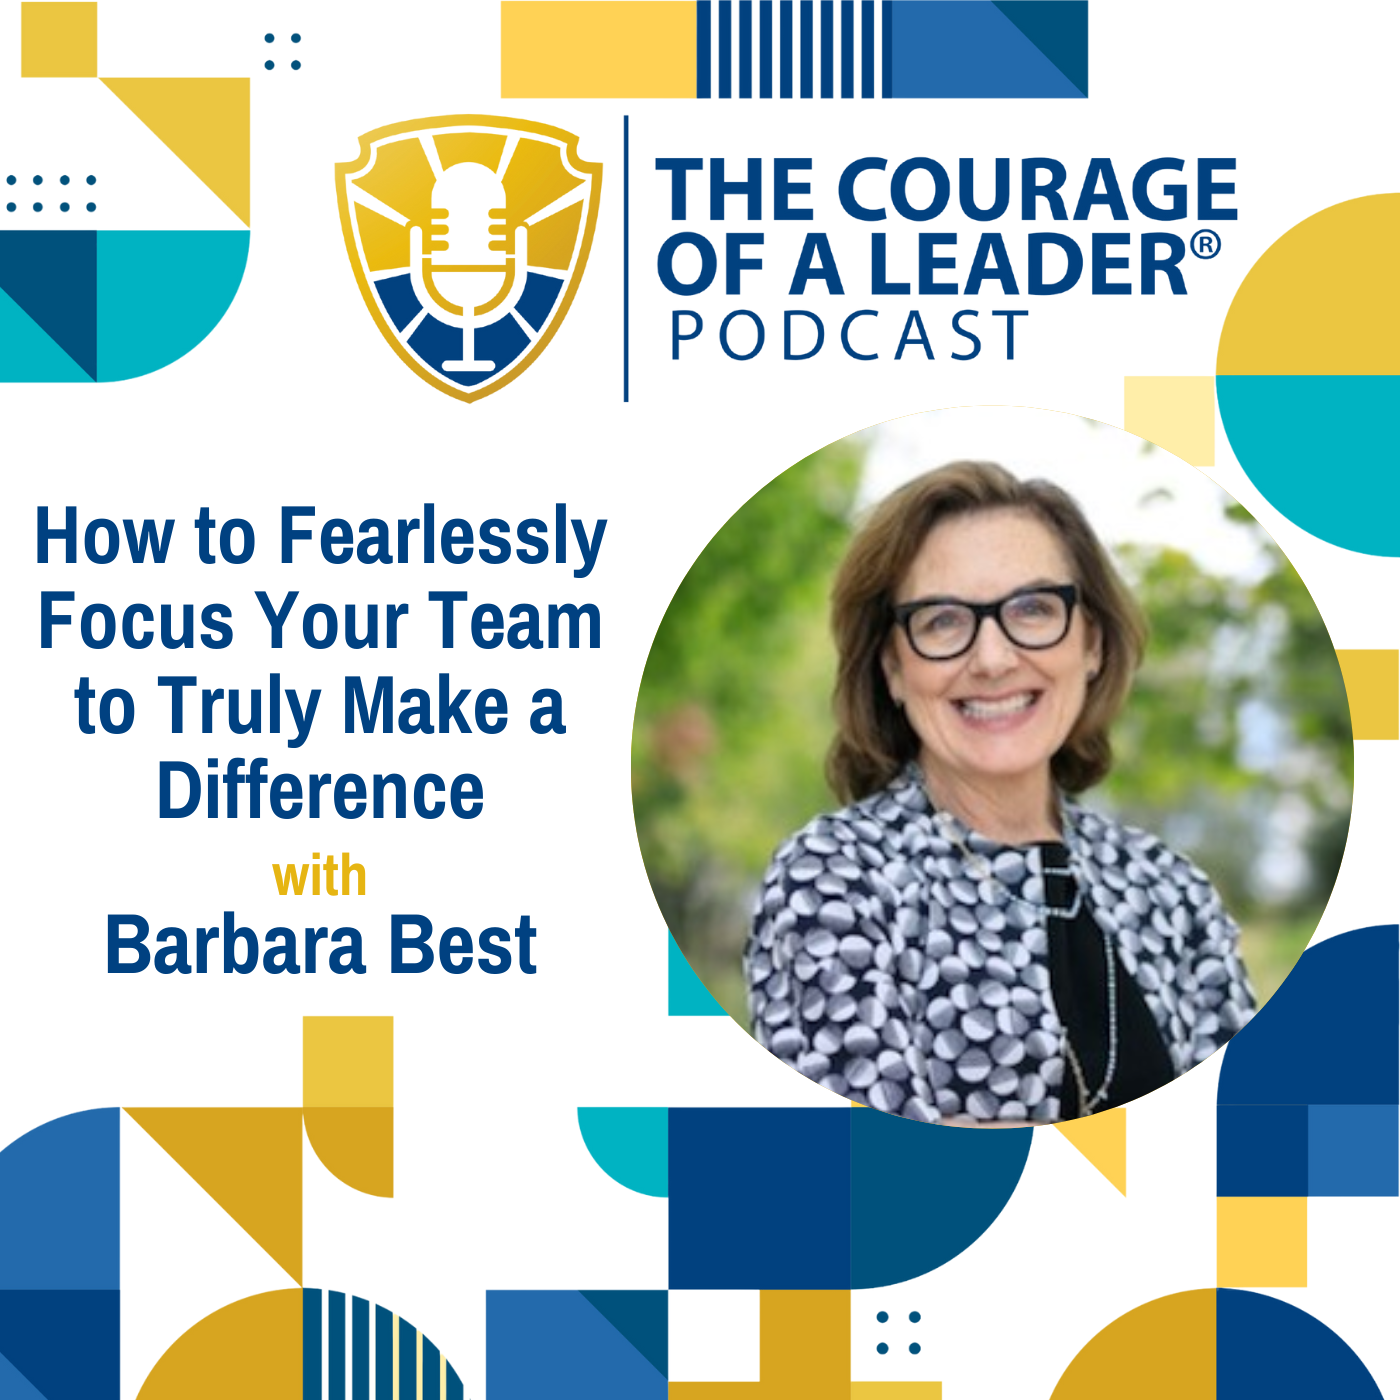 How to Fearlessly Focus Your Team to Truly Make a Difference with Barbara Best